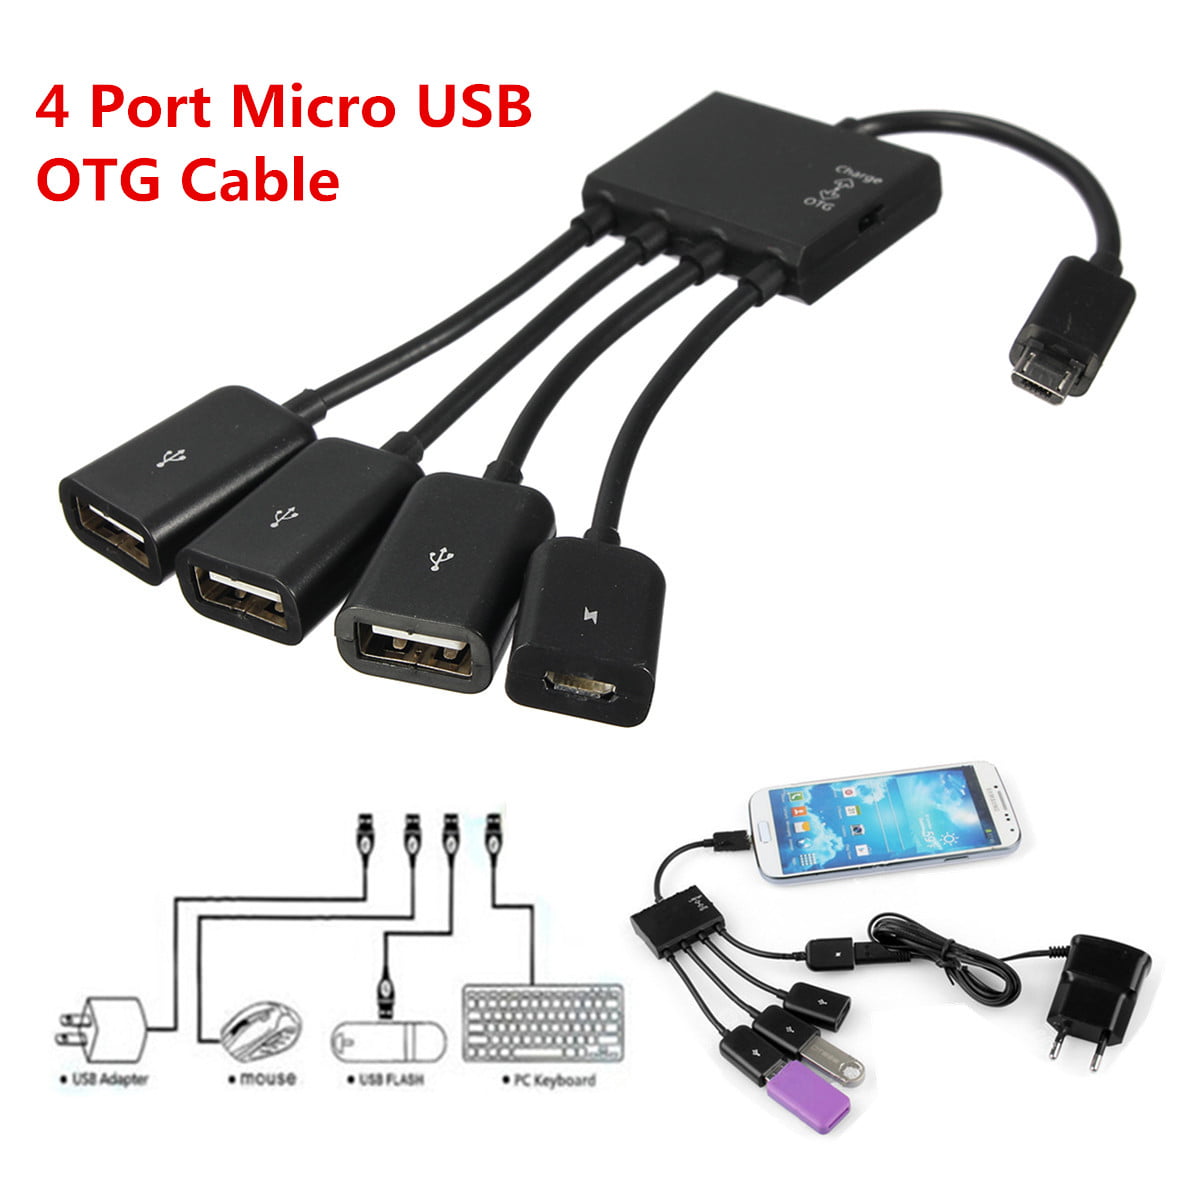 Accesorios para móviles Móviles y telefonía 4 Port Micro USB Power Charging Hub Cable Adapter For Android Phone Tablet